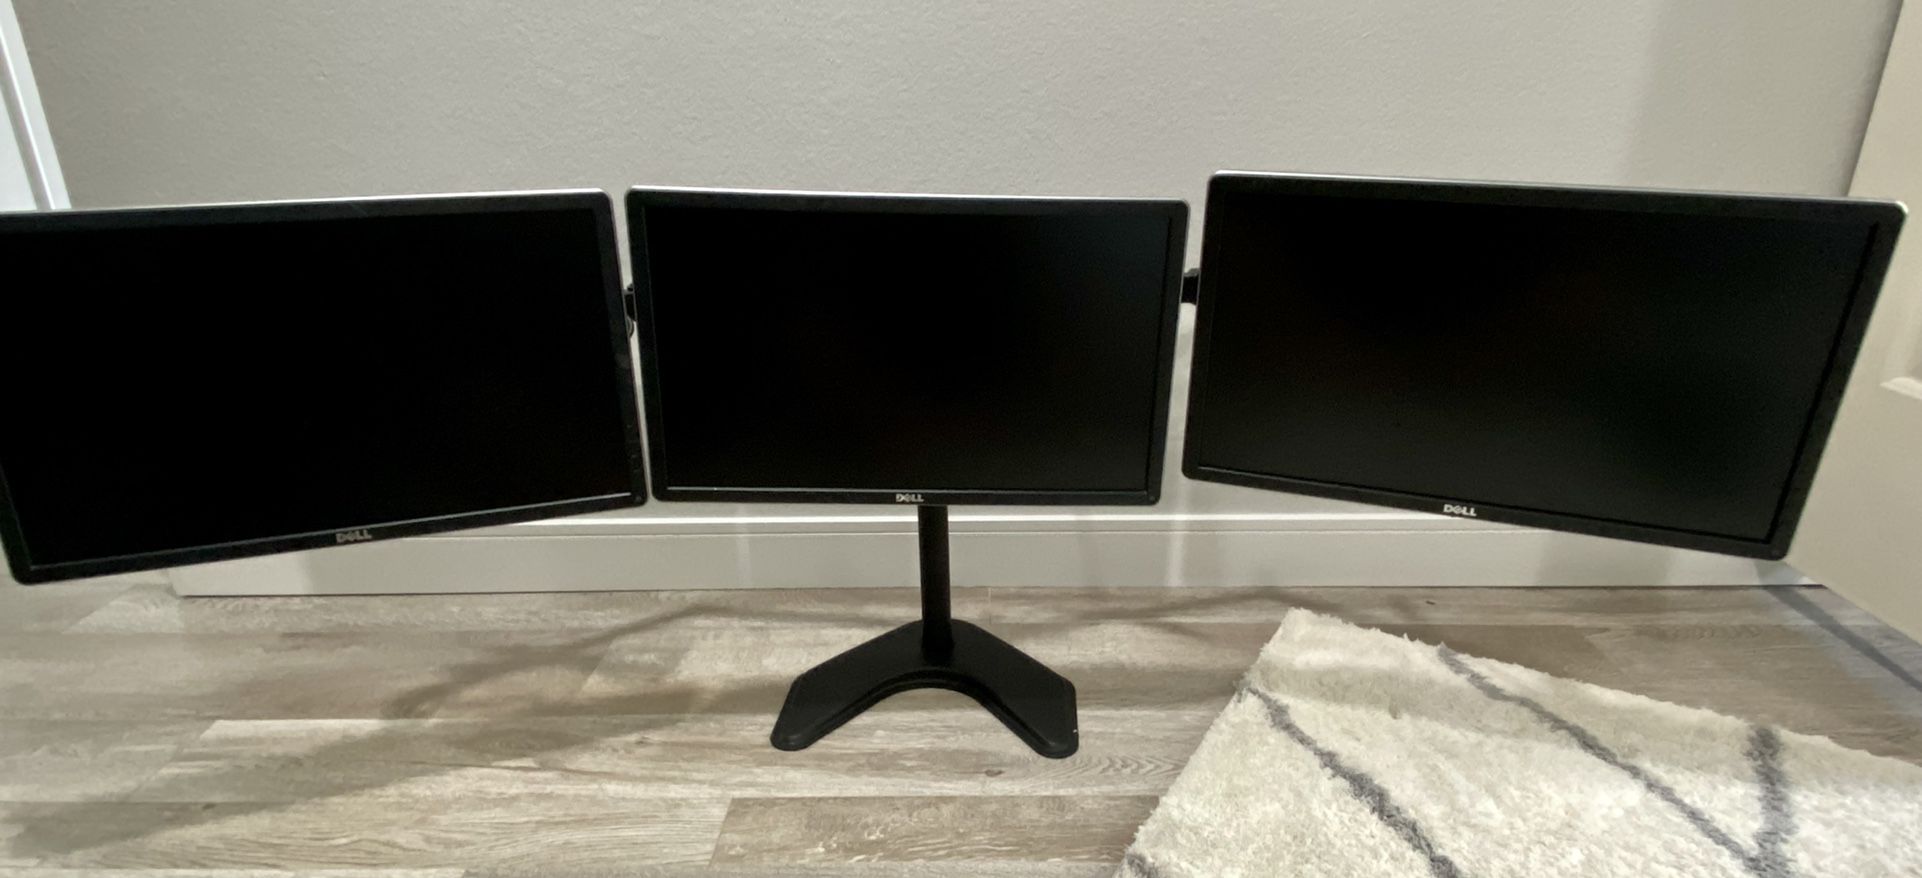 Dell 21.5” Monitors On Stand 